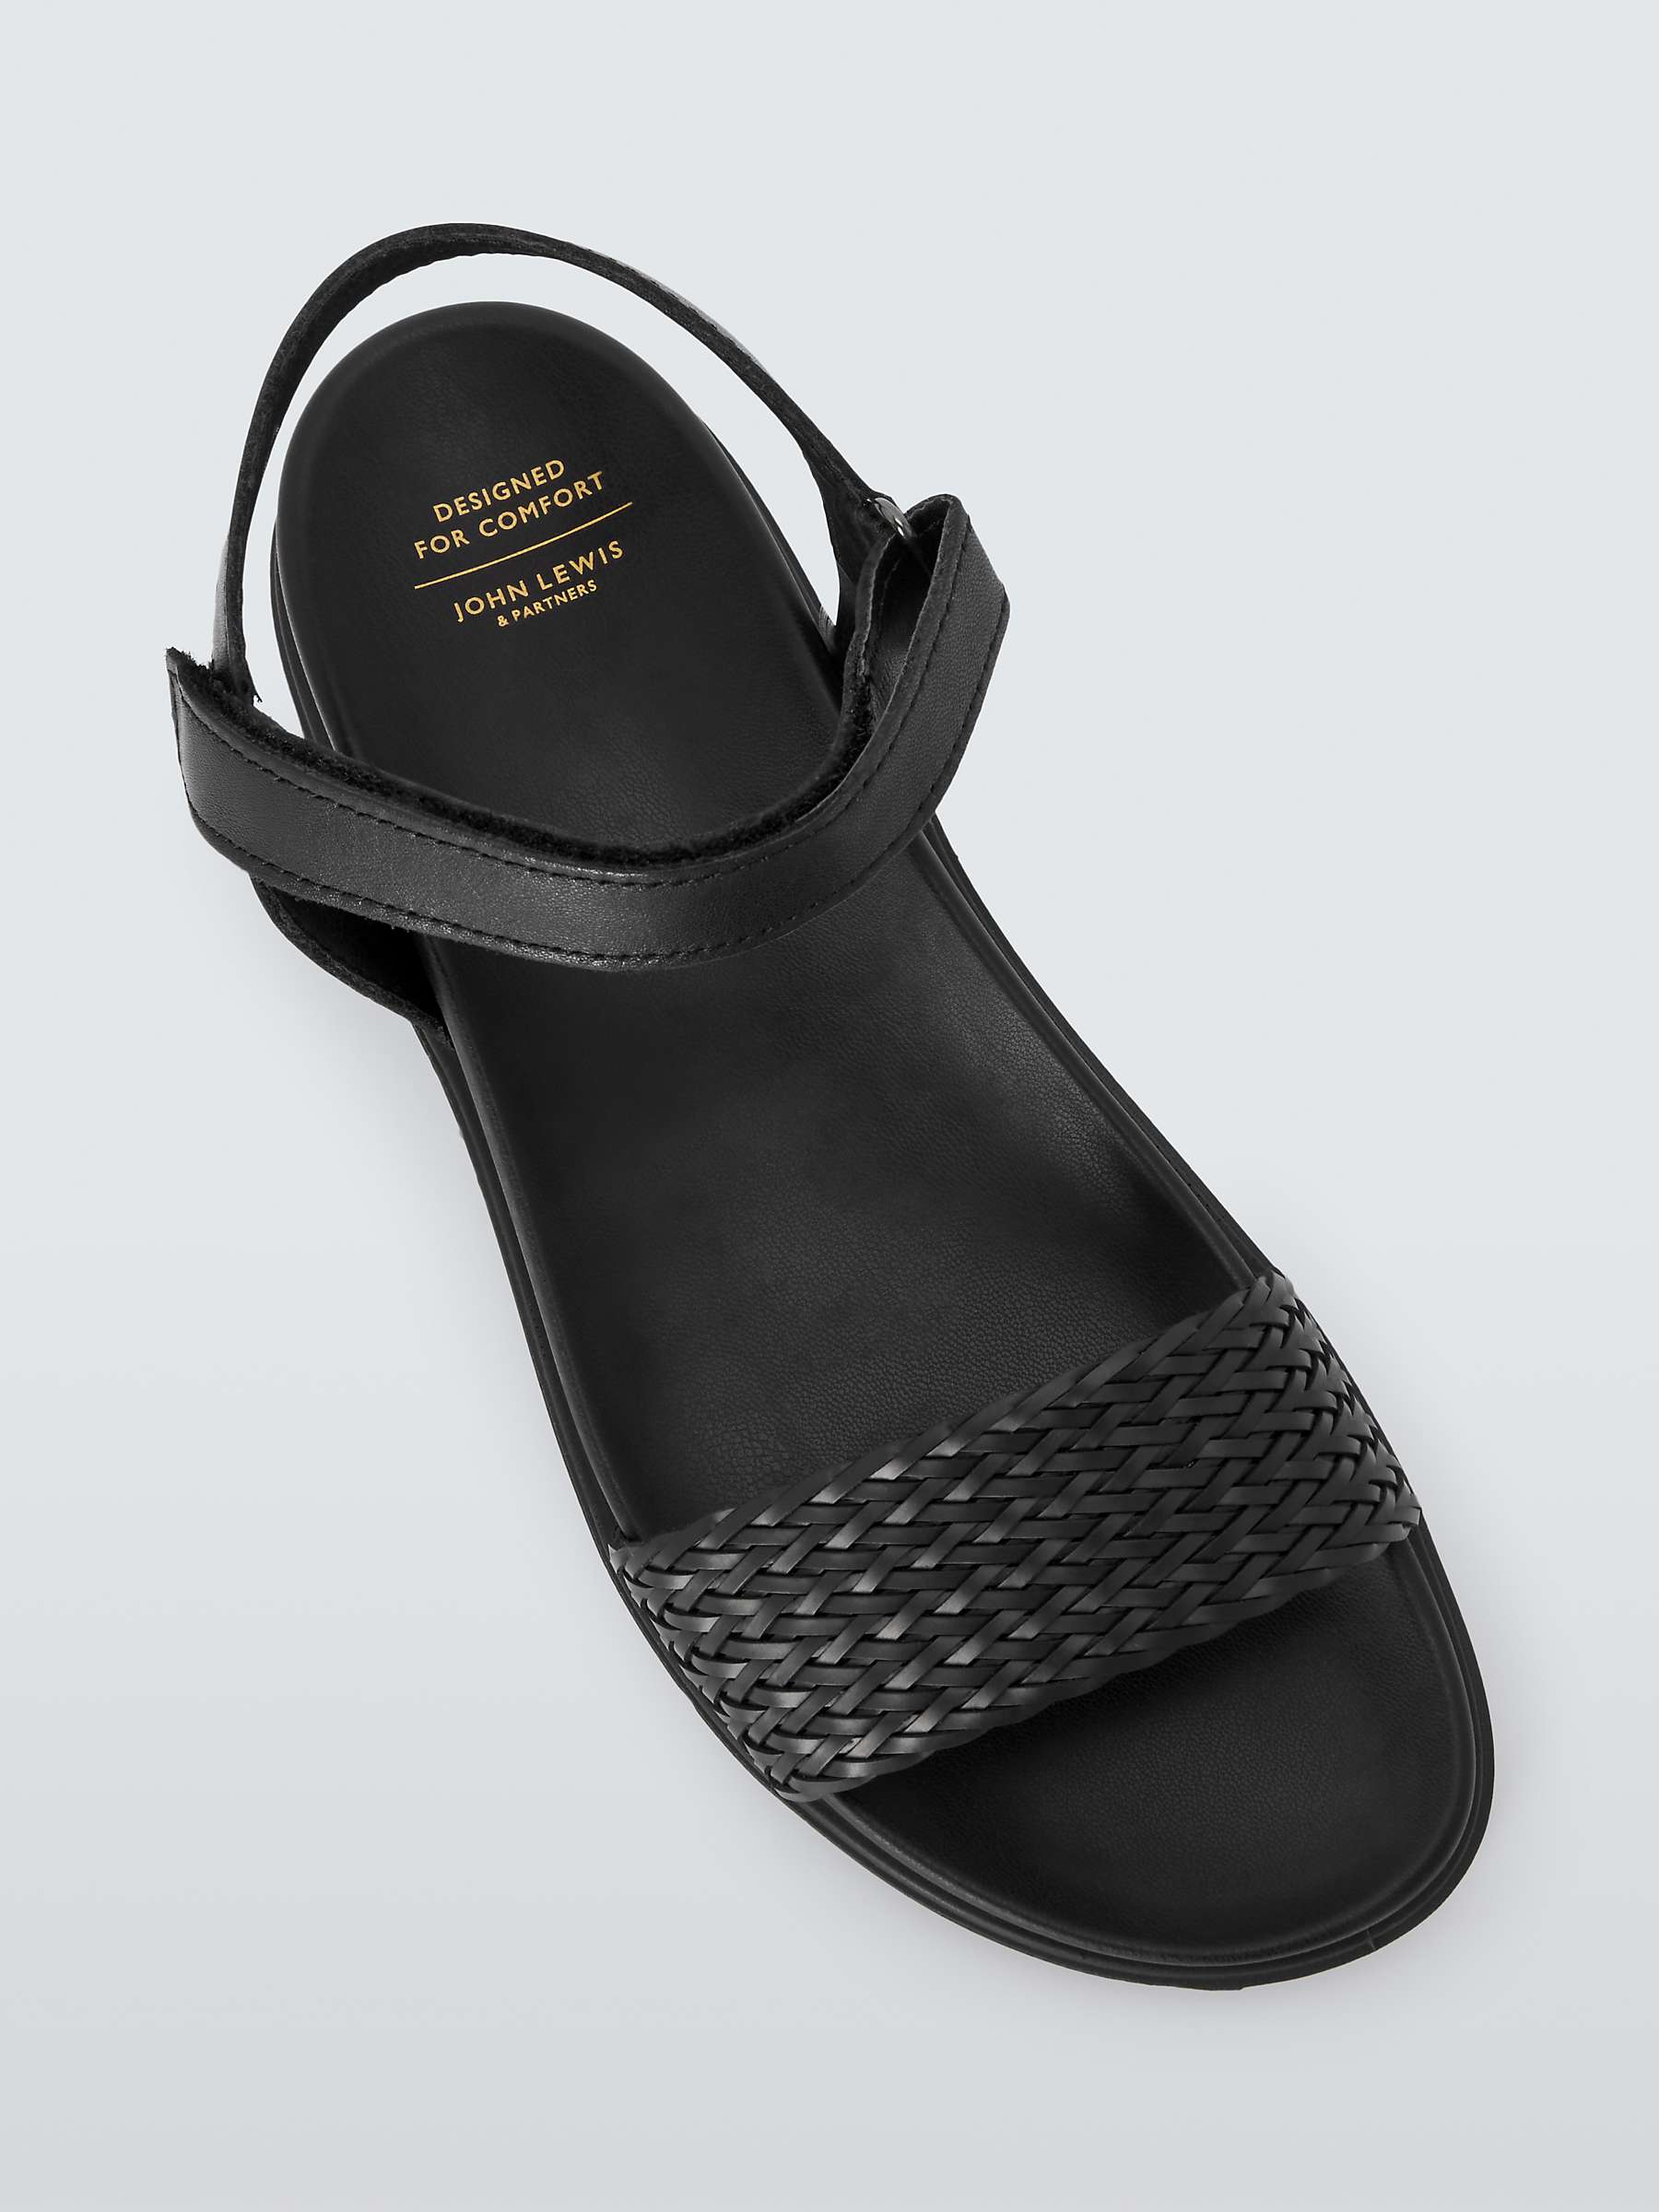 Buy John Lewis Lucie Leather Woven Strap Comfort Sandals Online at johnlewis.com